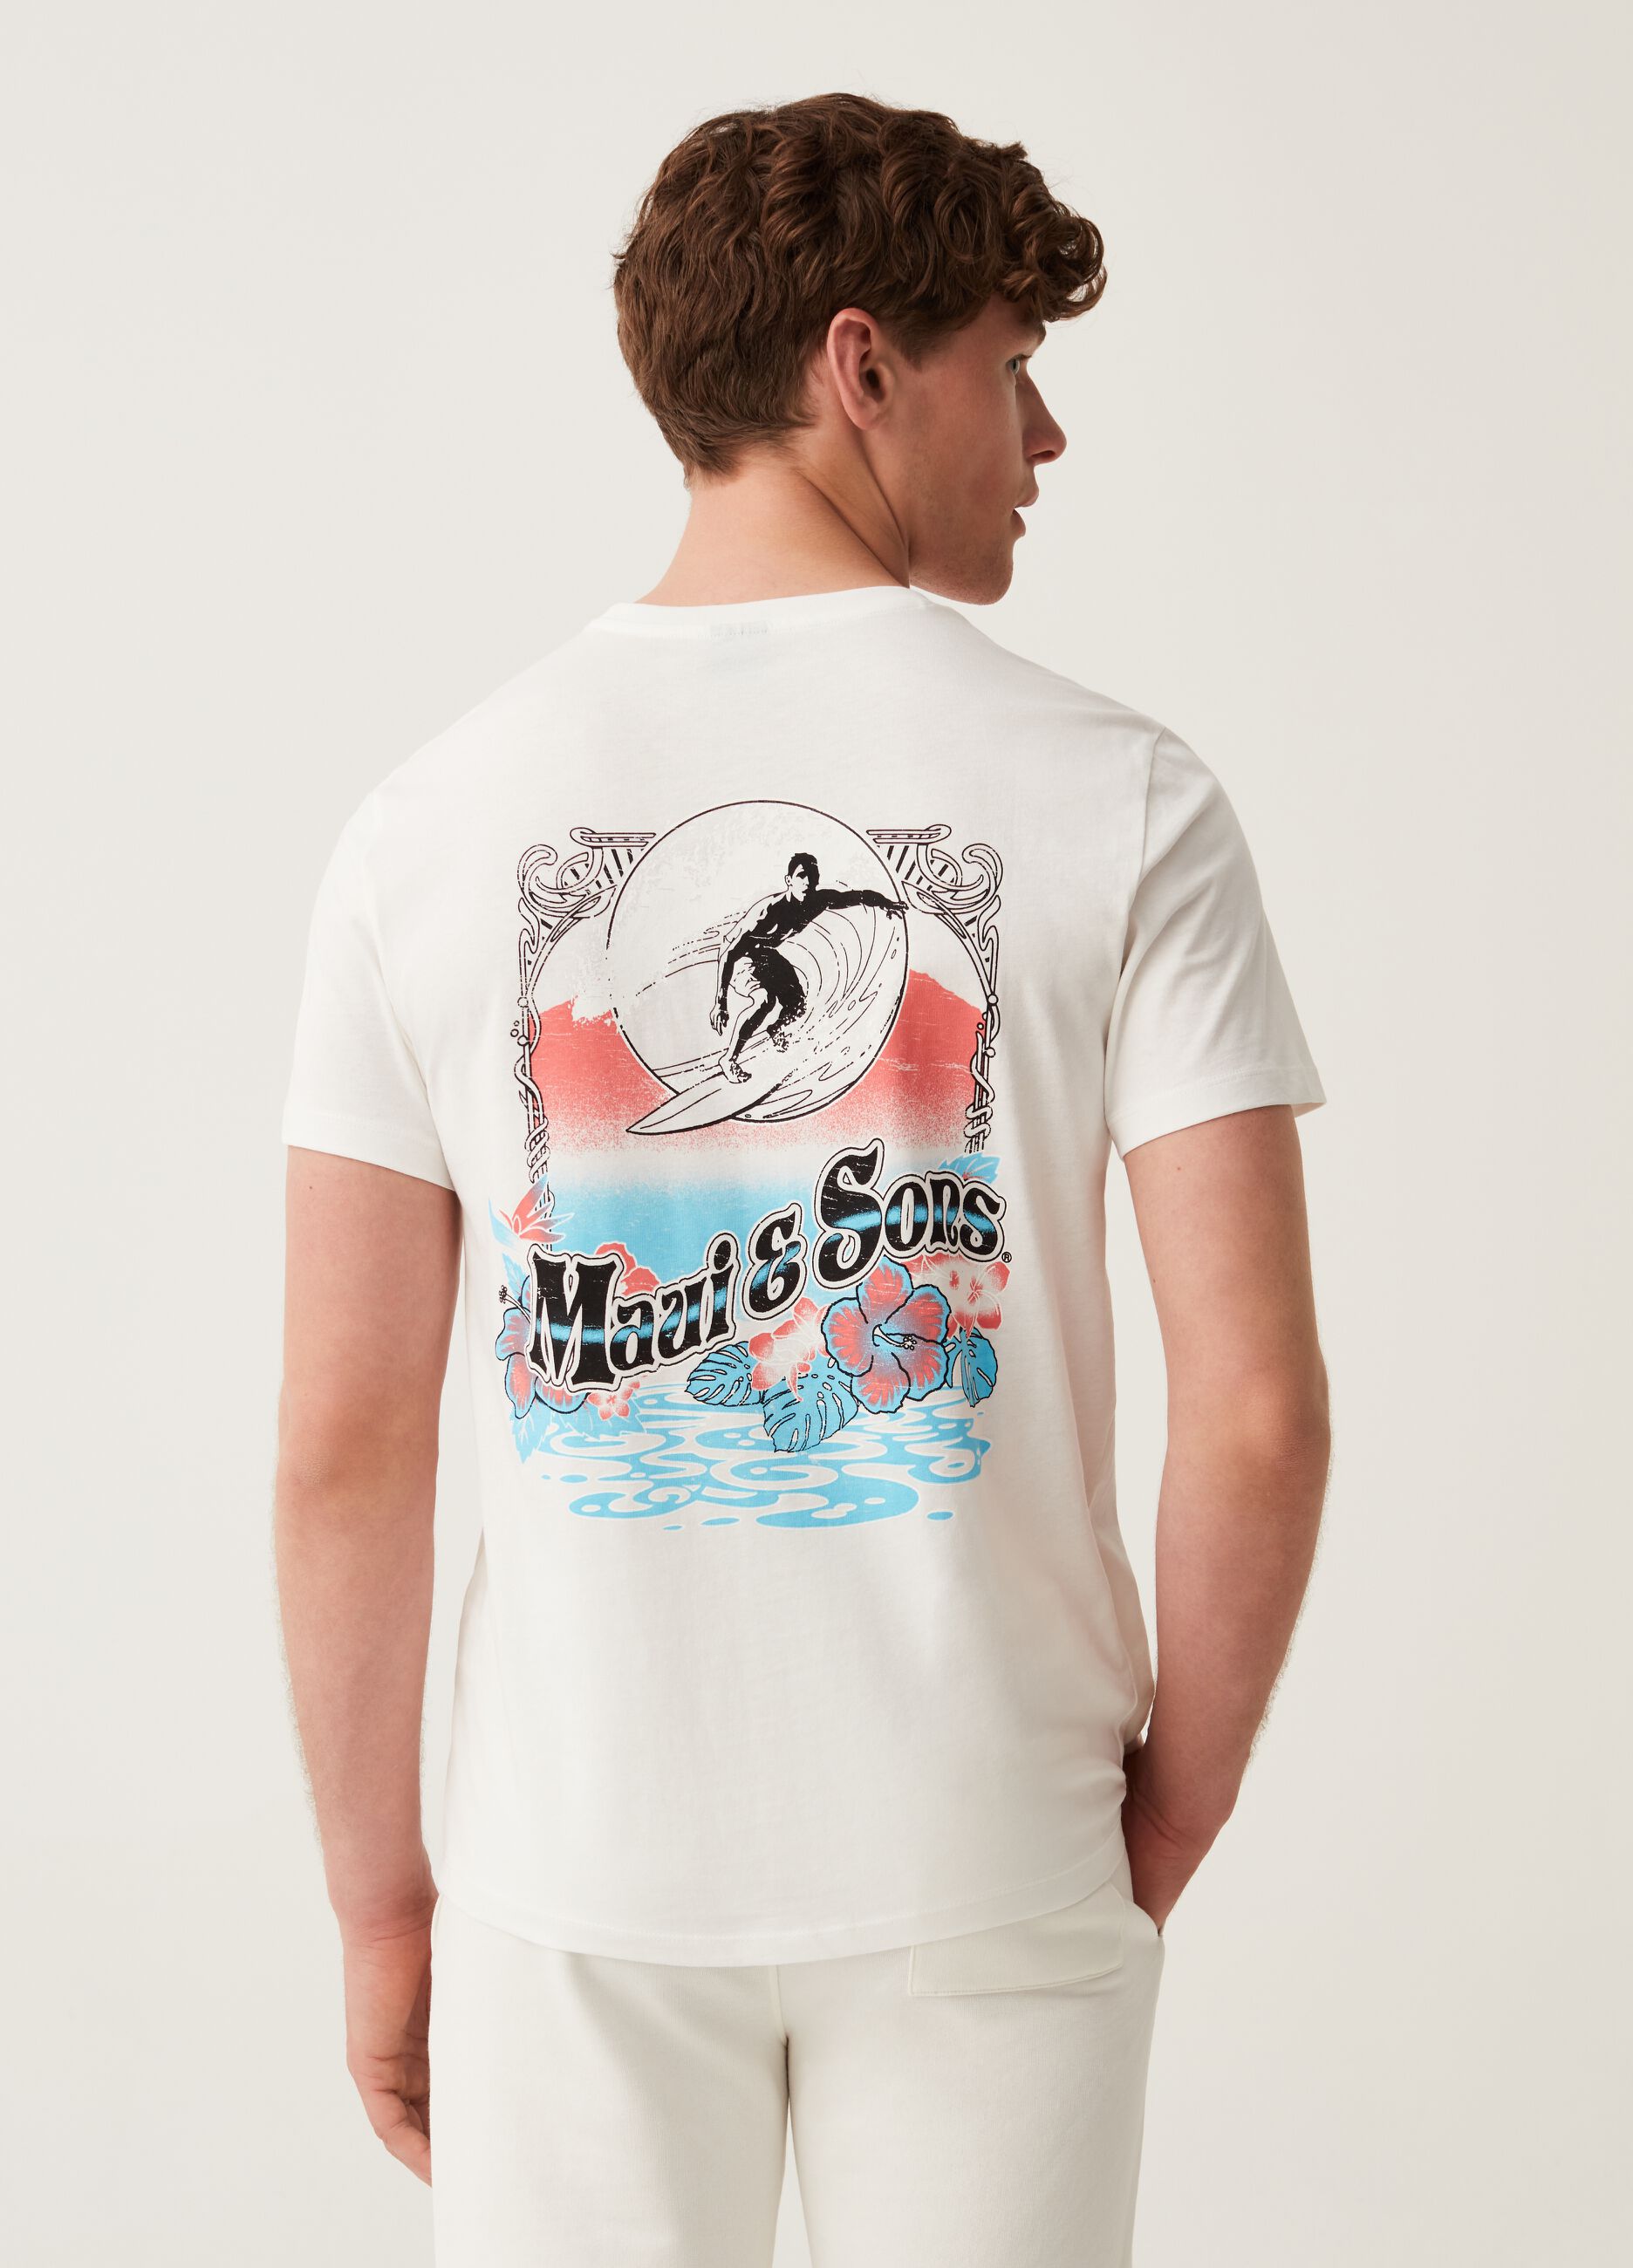 Cotton T-shirt with Maui and Sons print